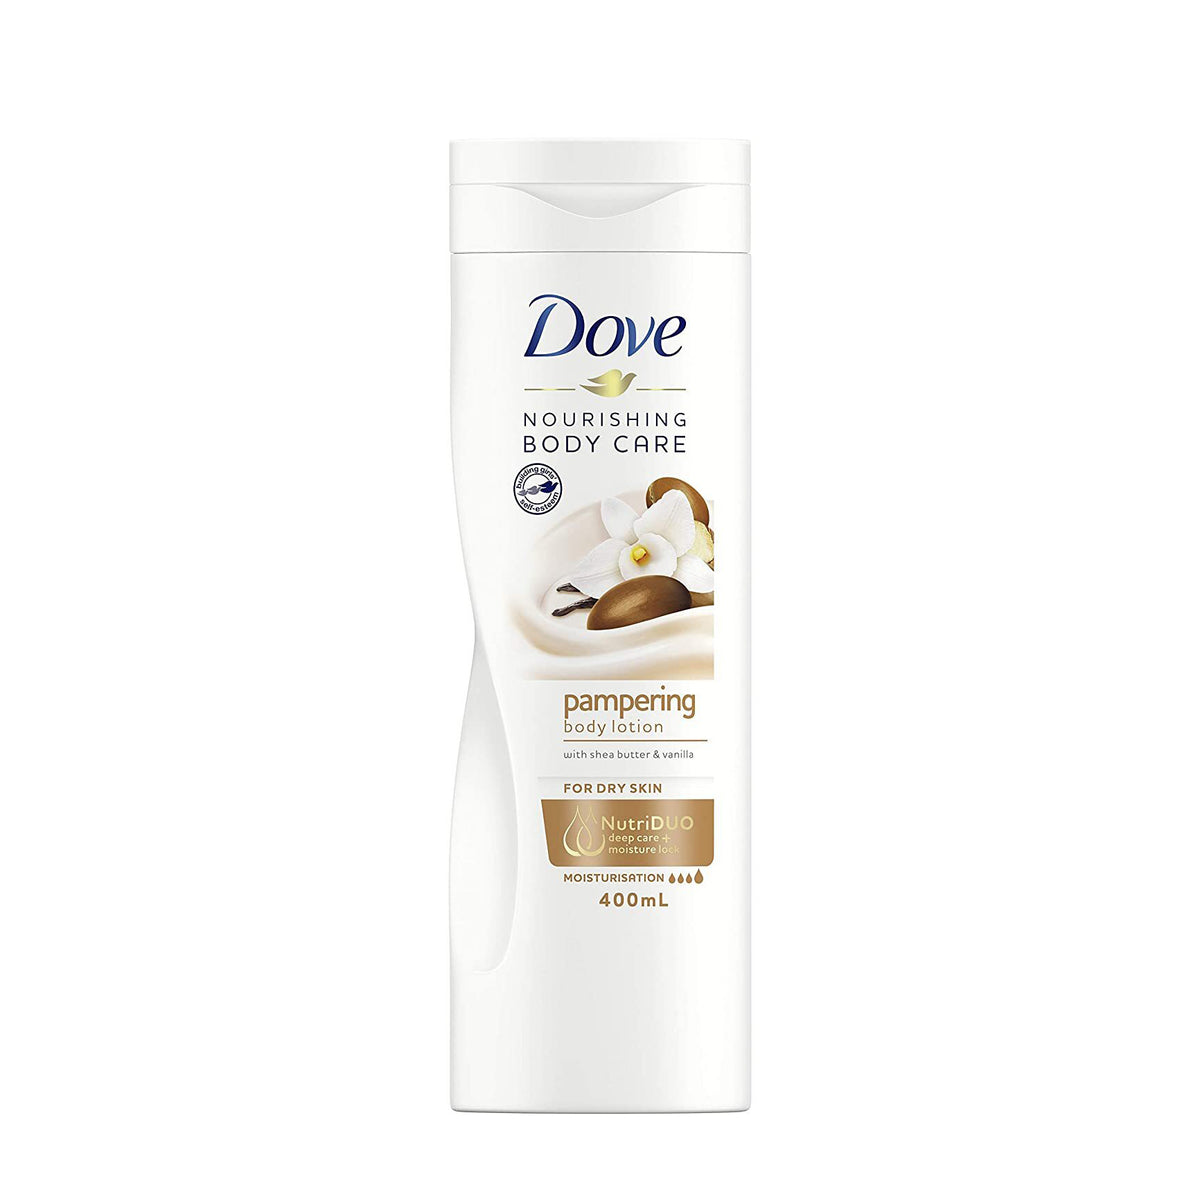 ondersteboven Konijn Plantage Dove - Nourishing Body Care Pampering Body Lotion with Shea Butter and —  Chiligala